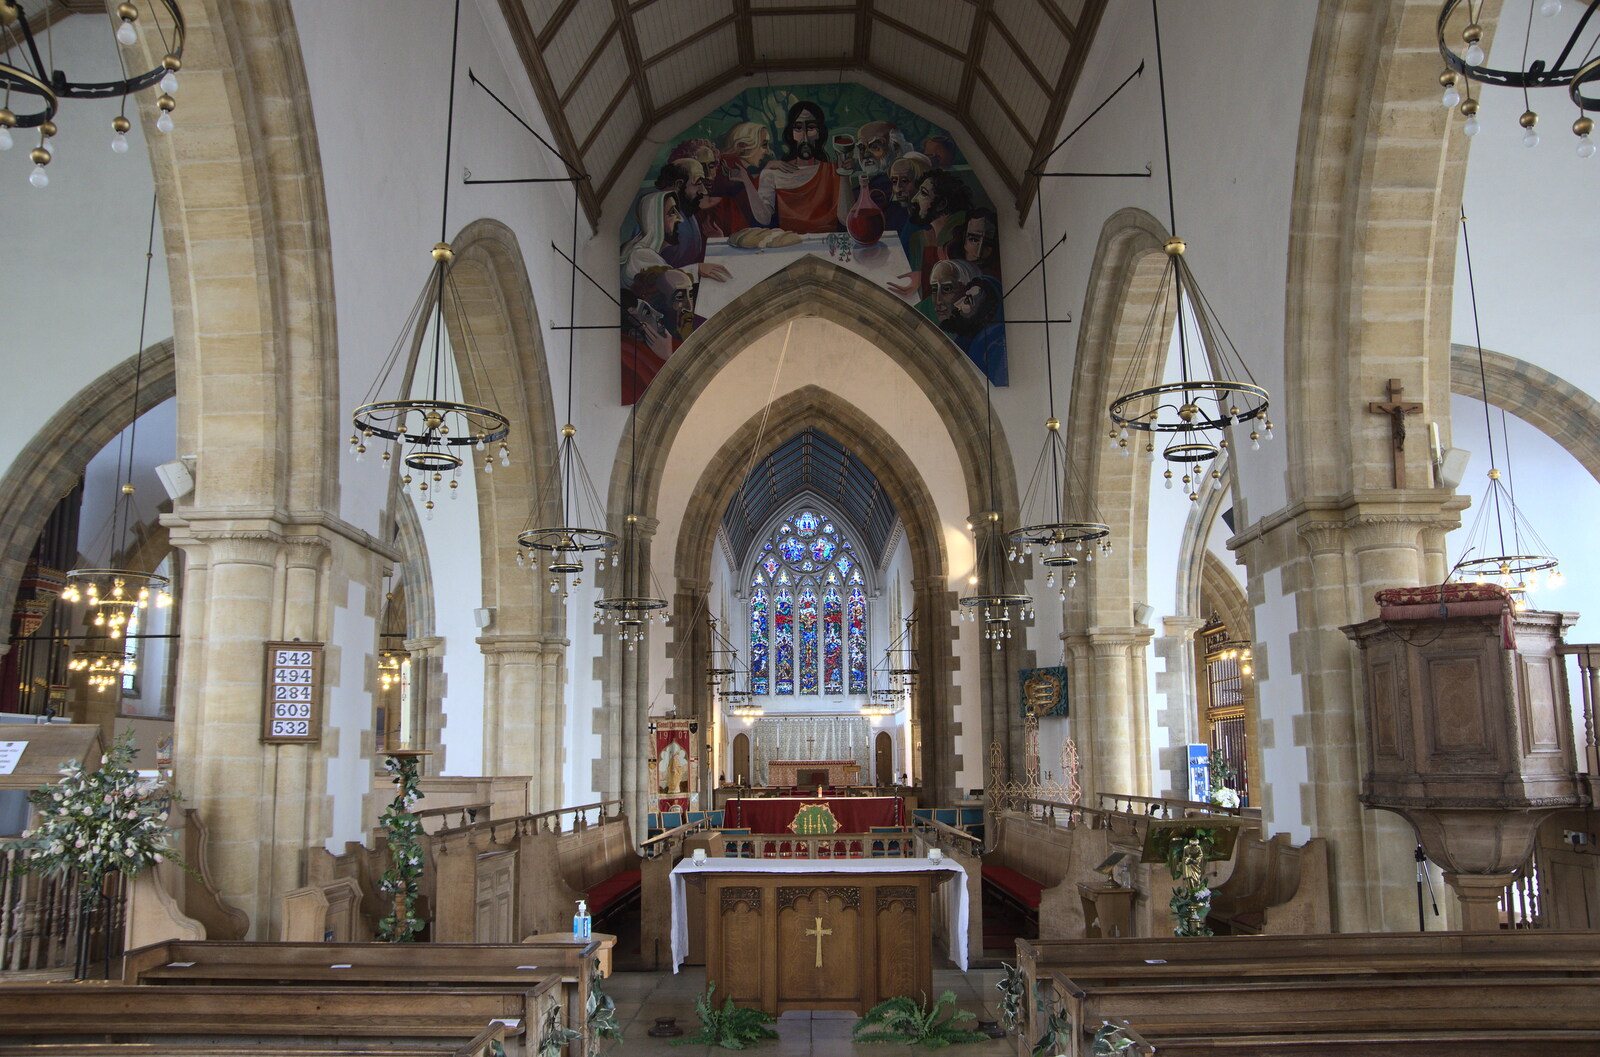 The Altar and nave of Yarmouth Minster from Faded Seaside Glamour: A Weekend in Great Yarmouth, Norfolk - 29th May 2022